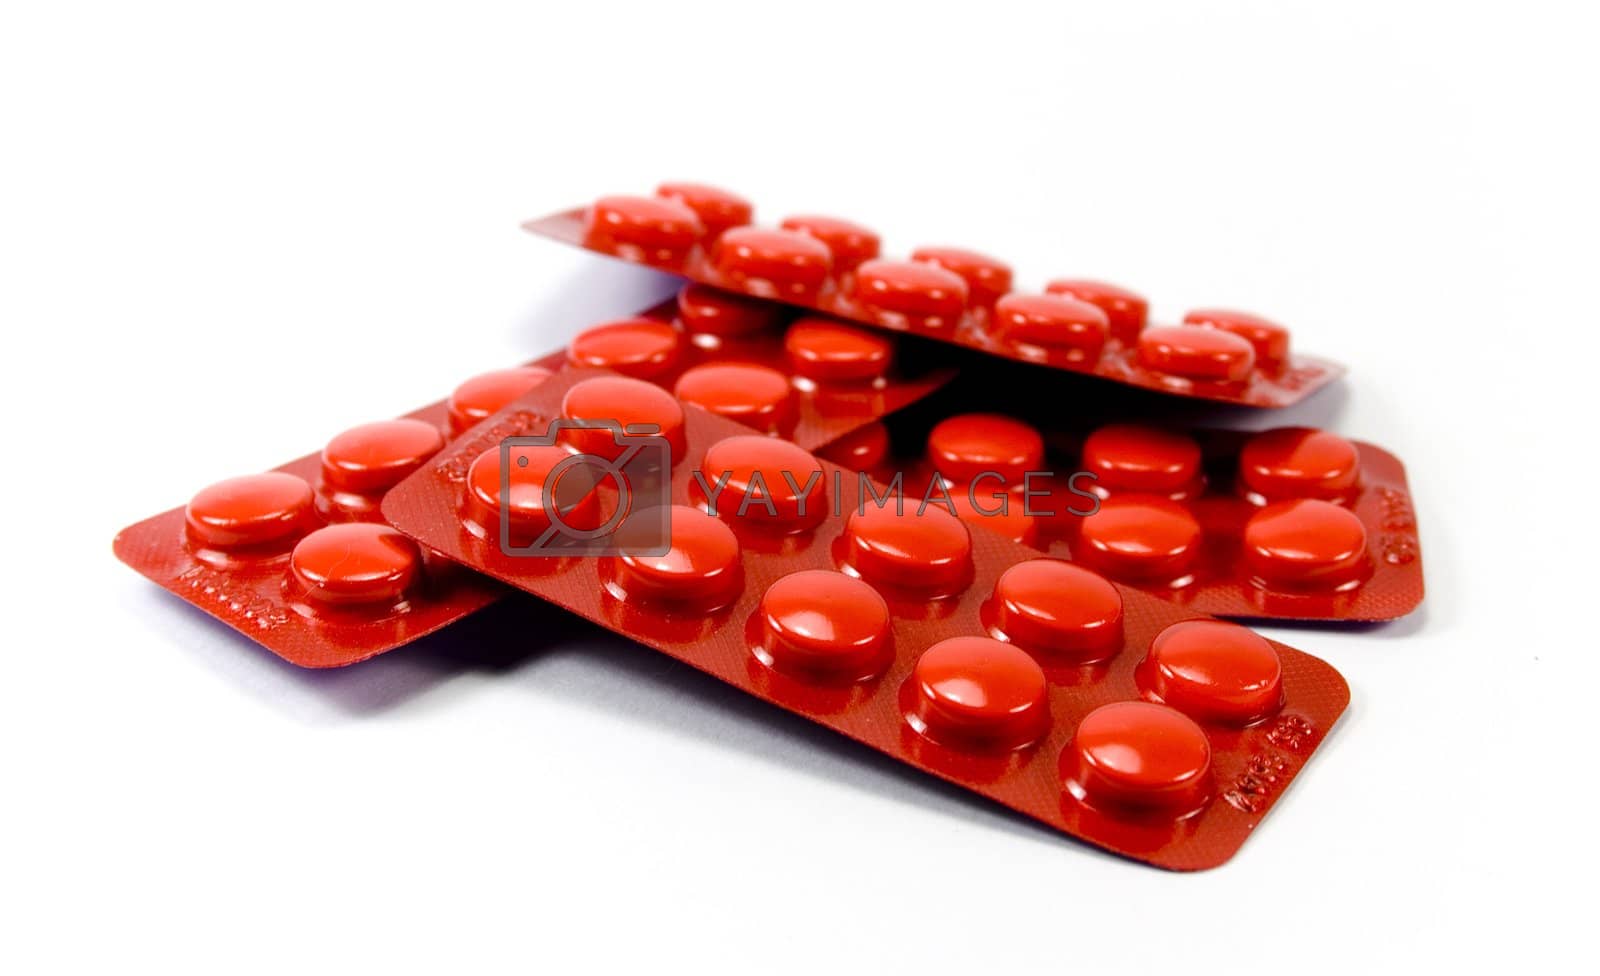 Royalty free image of red blisters by marylooo